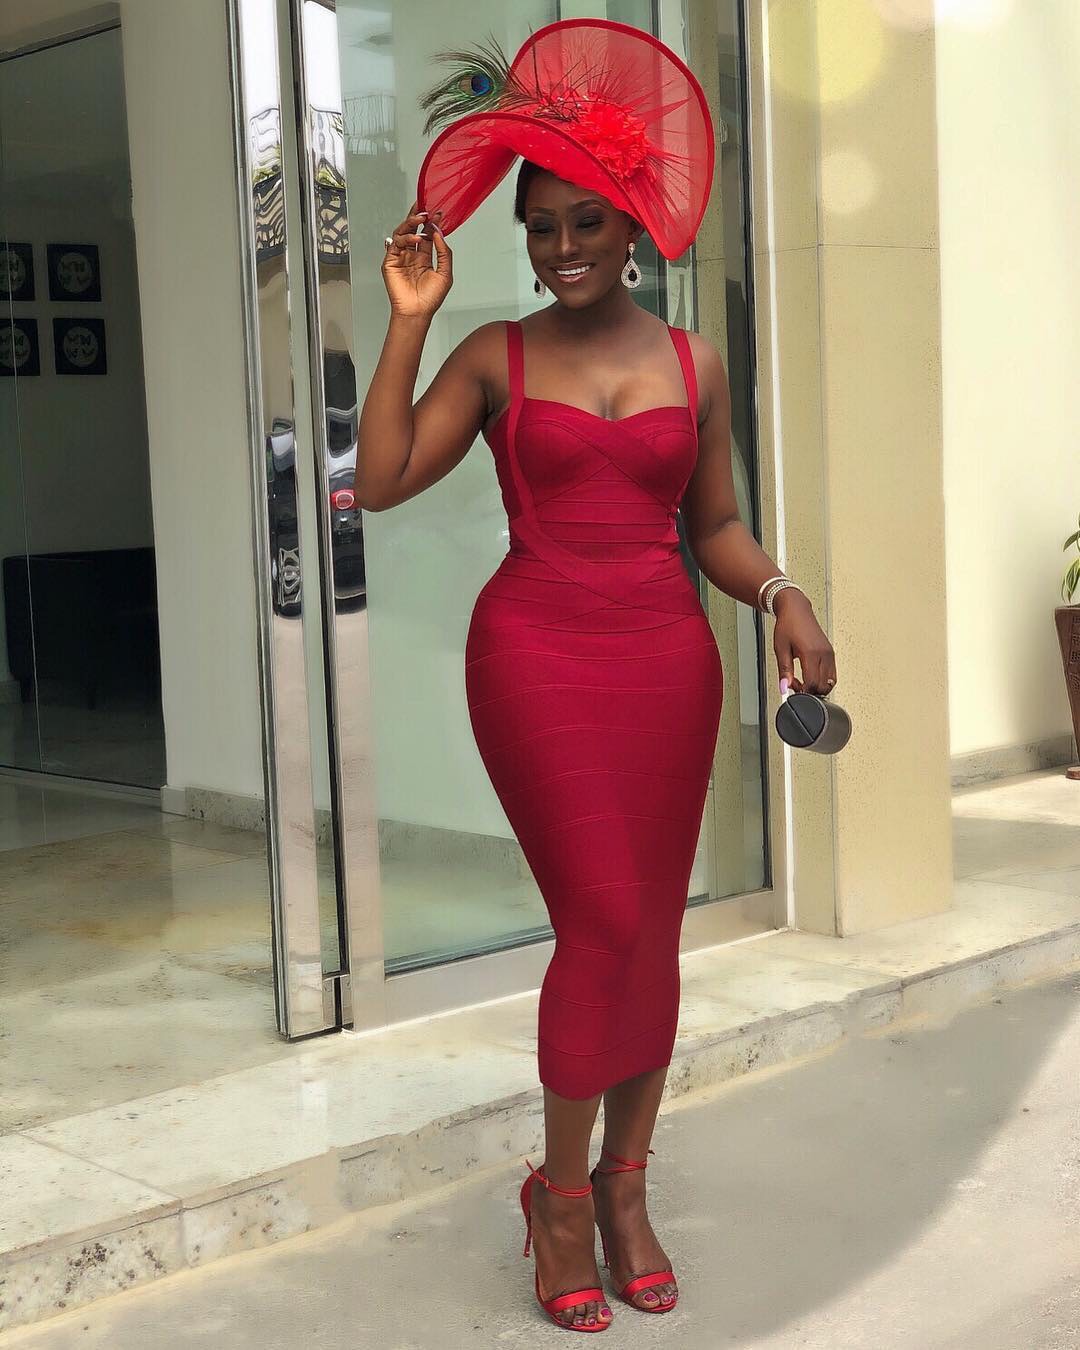 Does Ini Edo Look Better Than Linda Osifo In This Fascinator Style Off?